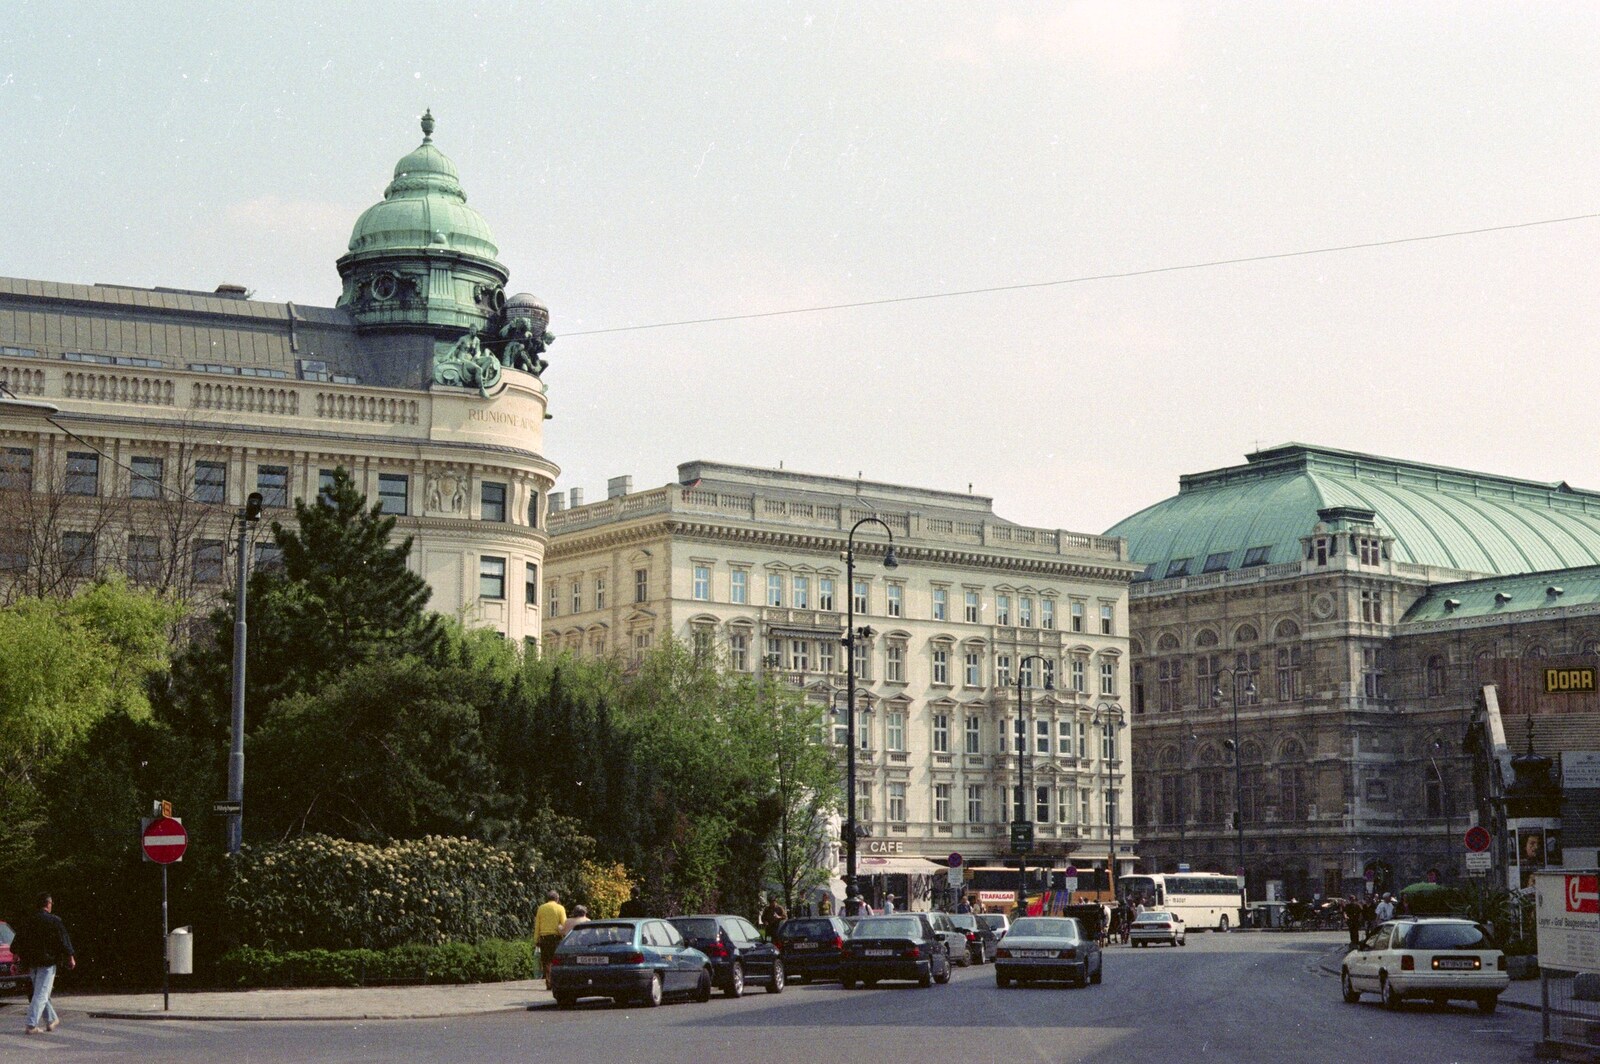 More Vienna, and the Opera House from A Postcard From Hofburg Palace, Vienna, Austria - 18th April 2000